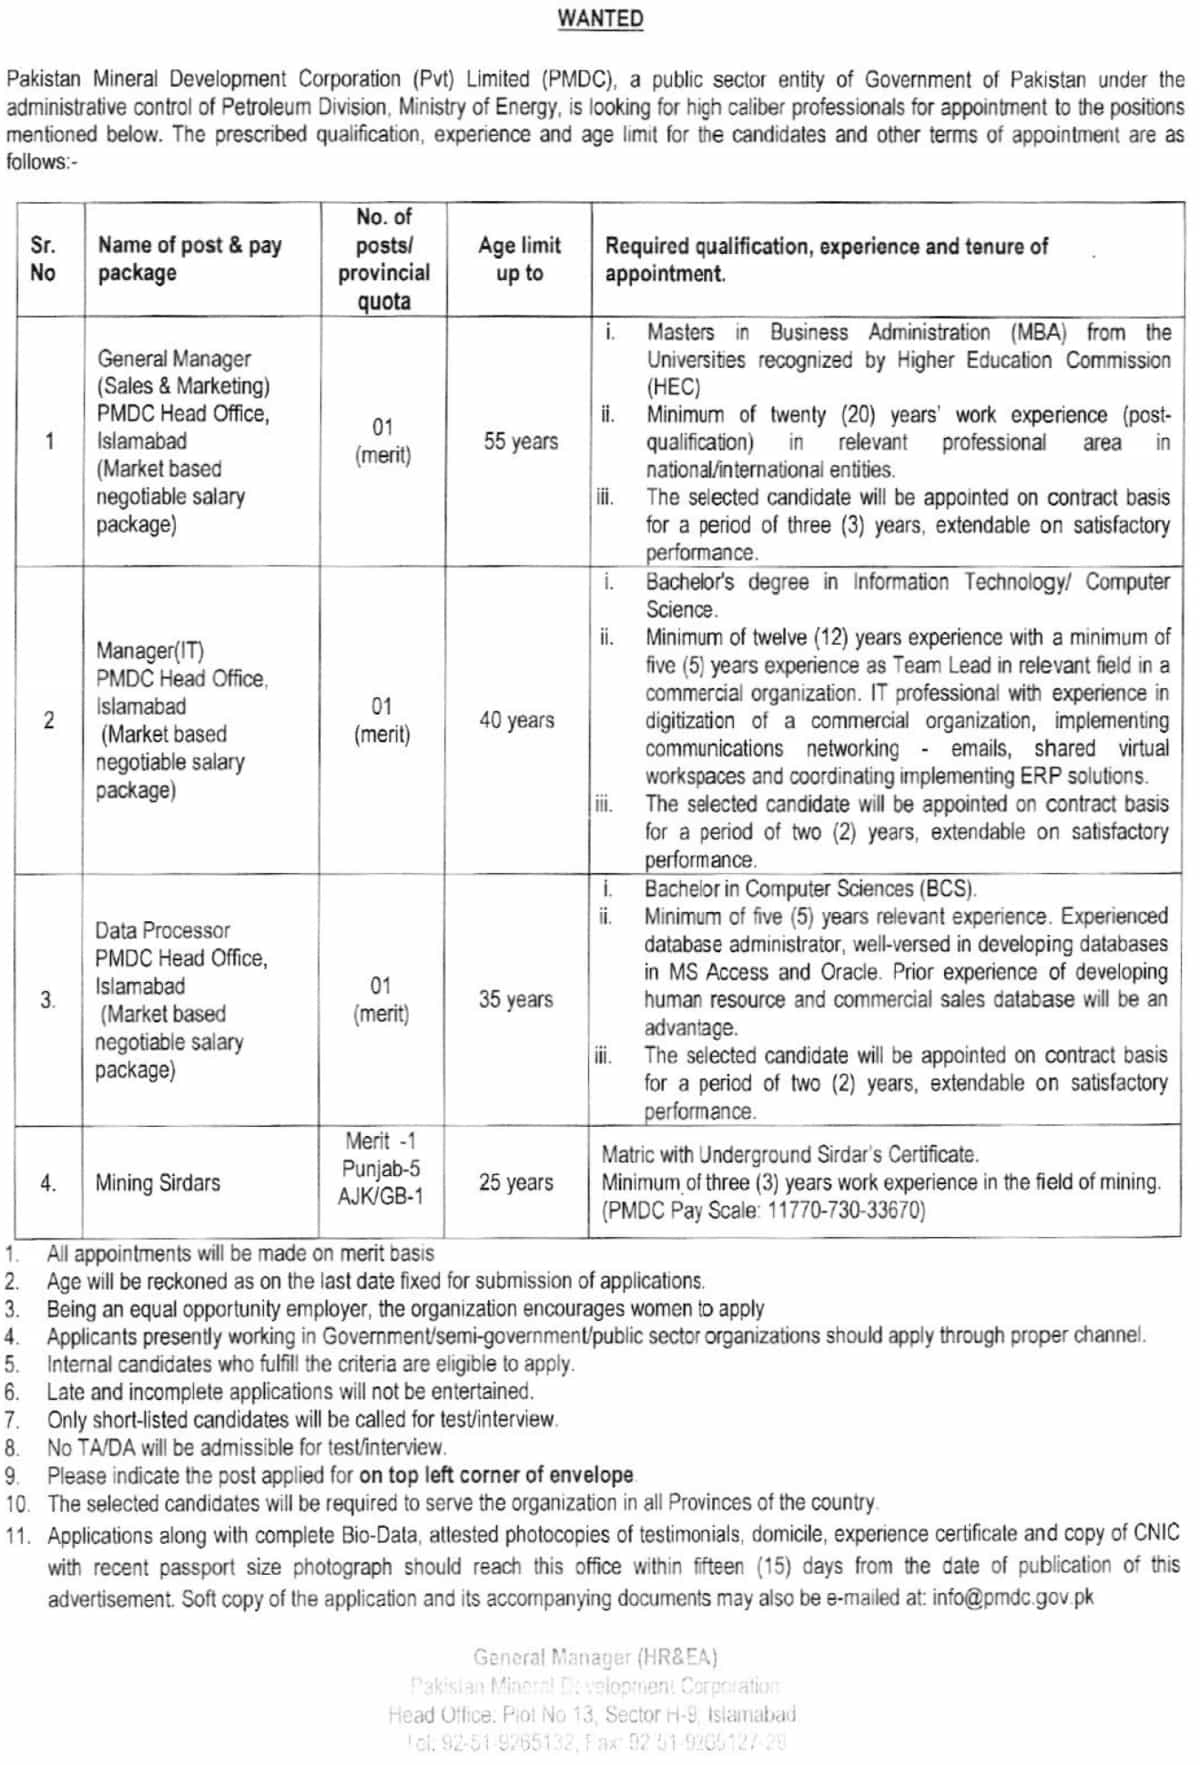 PMDC Islamabad Jobs 2021 Ministry of Energy Government of Pakistan